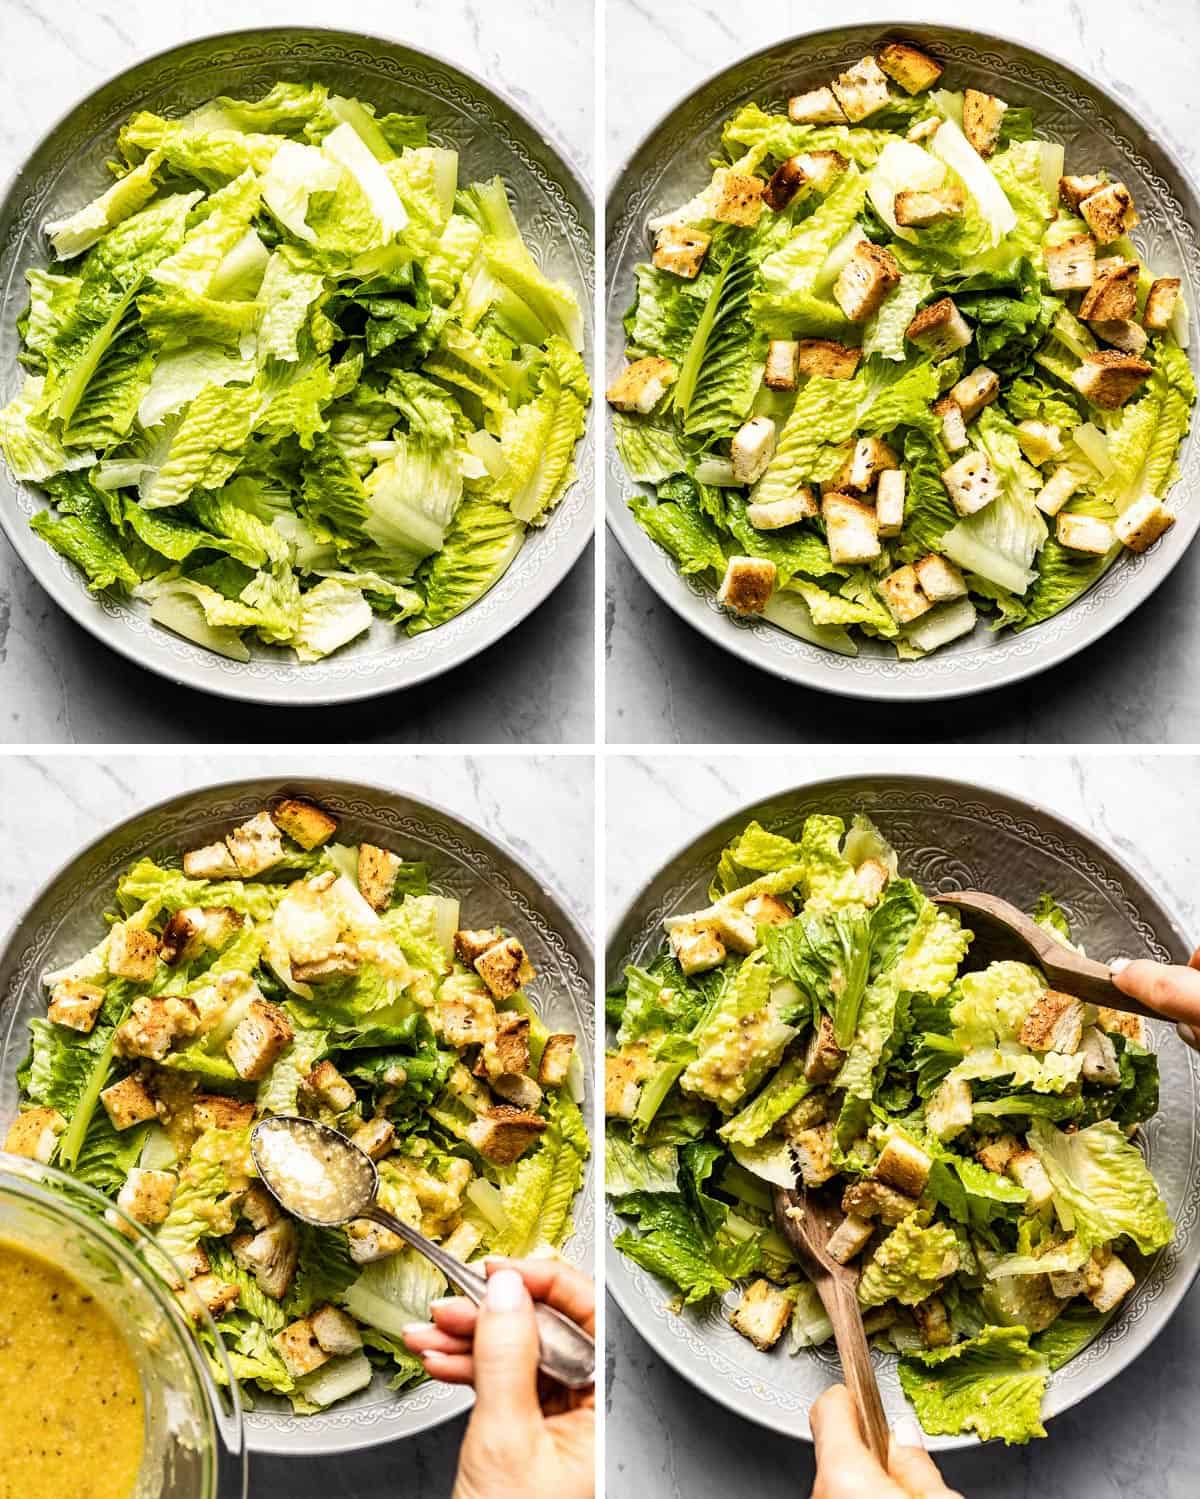 Person showing how to make Caesar Salad in step by step photos